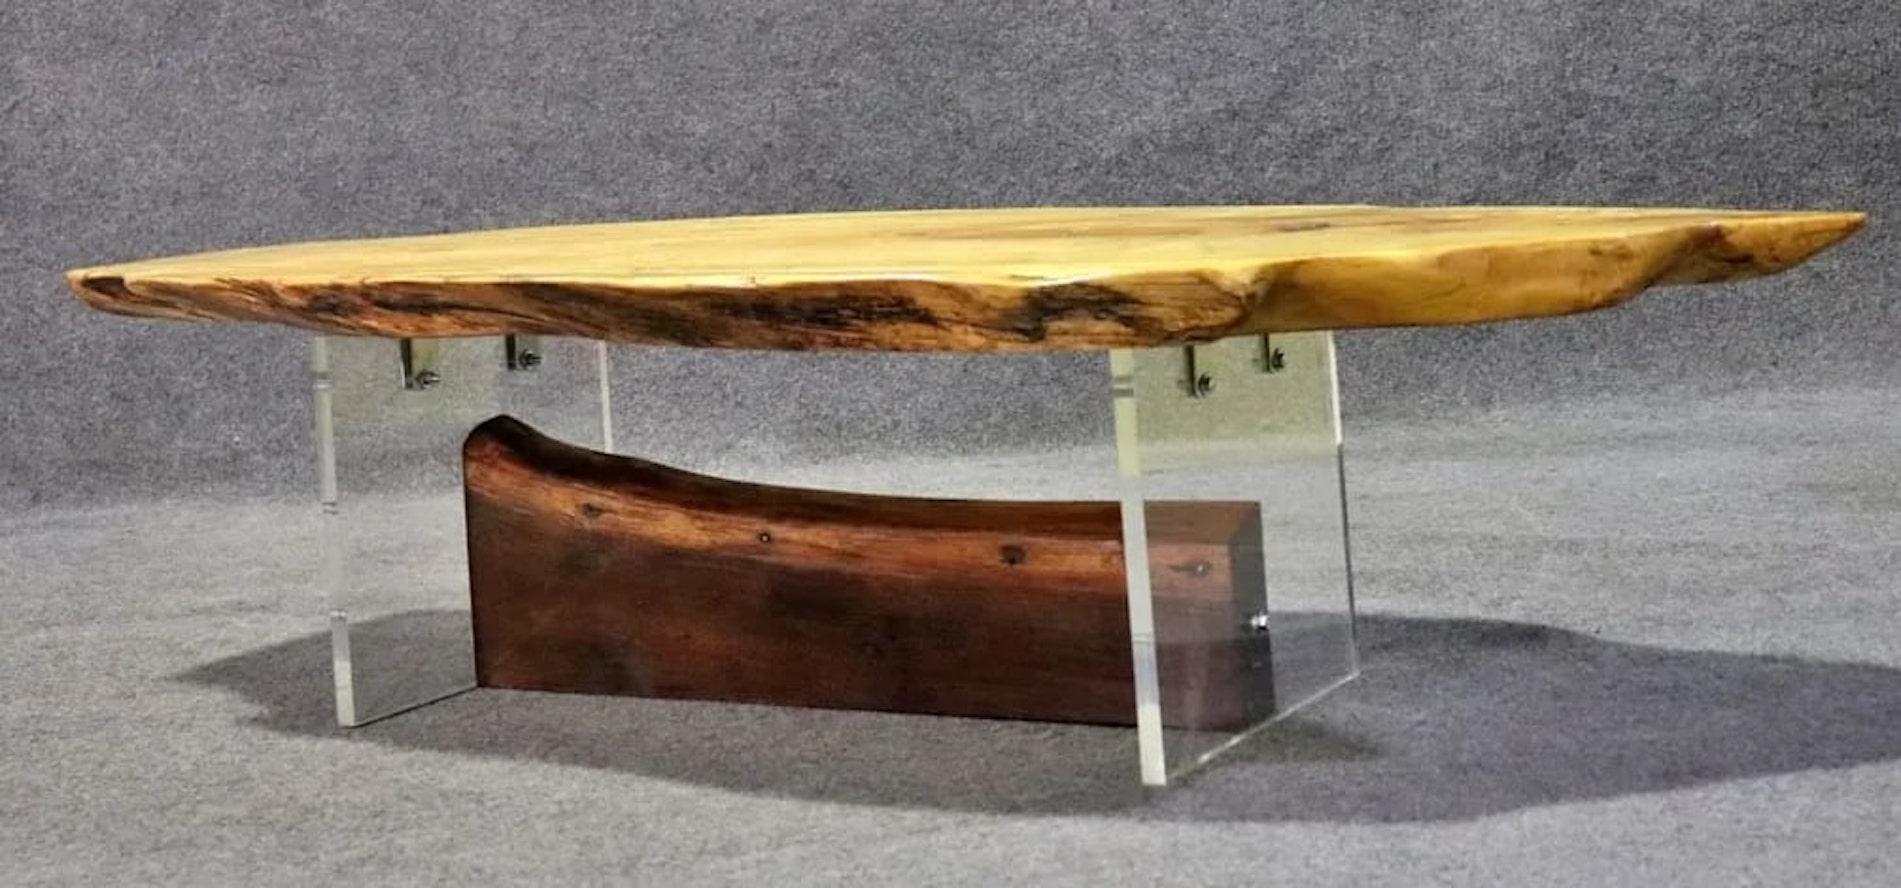 Unique artist made coffee table with live edge slab atop a clear acrylic base with wood runner.
Please confirm location NY or NJ